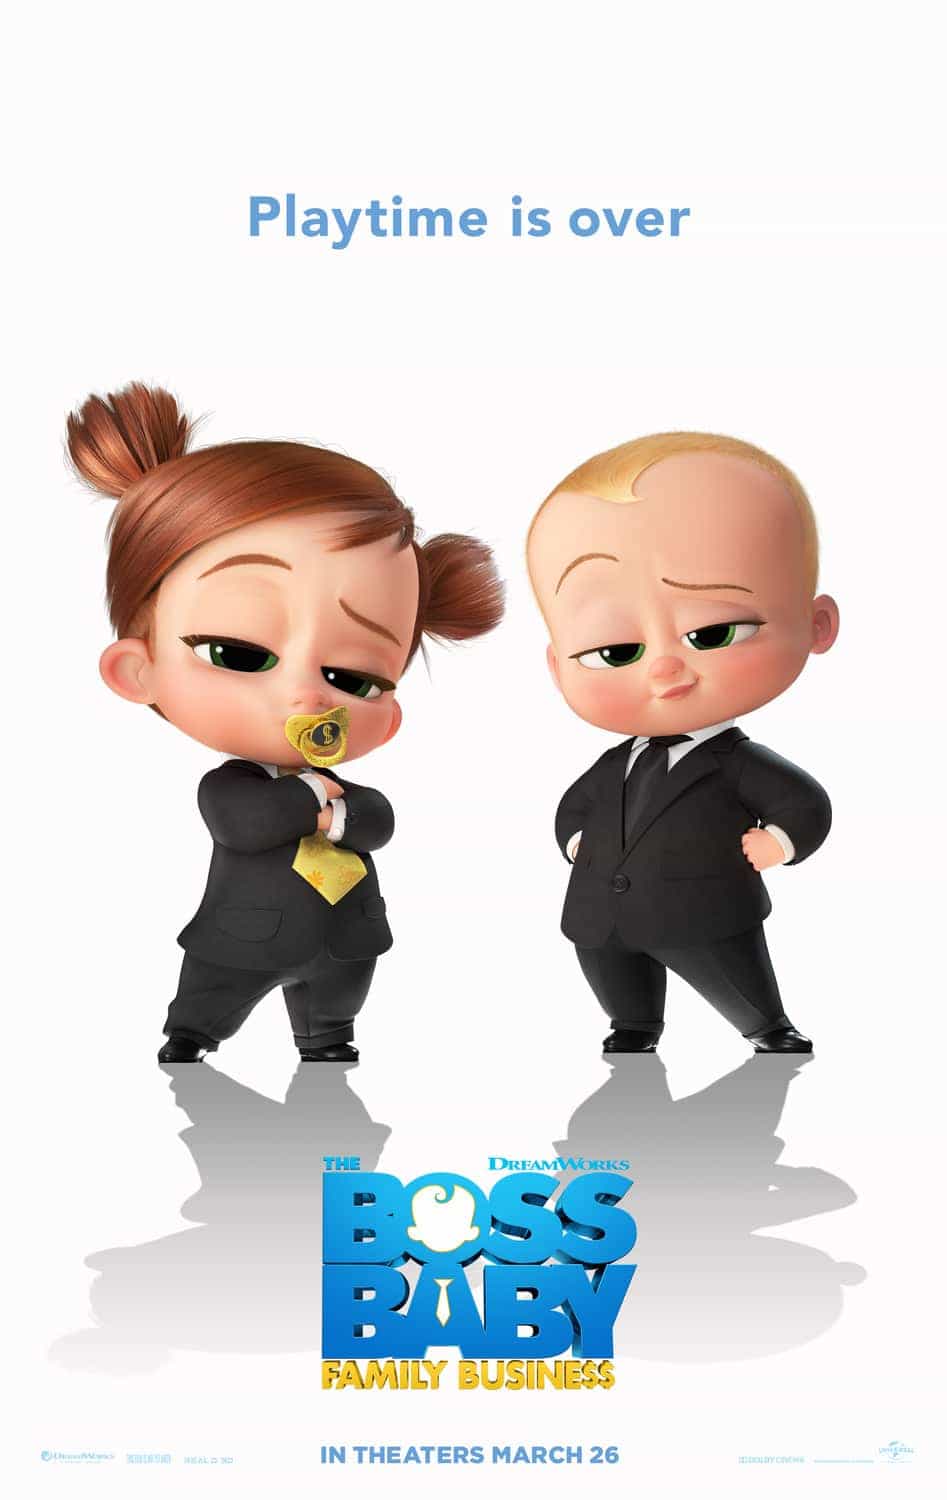 The Boss Baby 2: Family Business is given a PG age rating in the UK for mild bad language, violence, threat